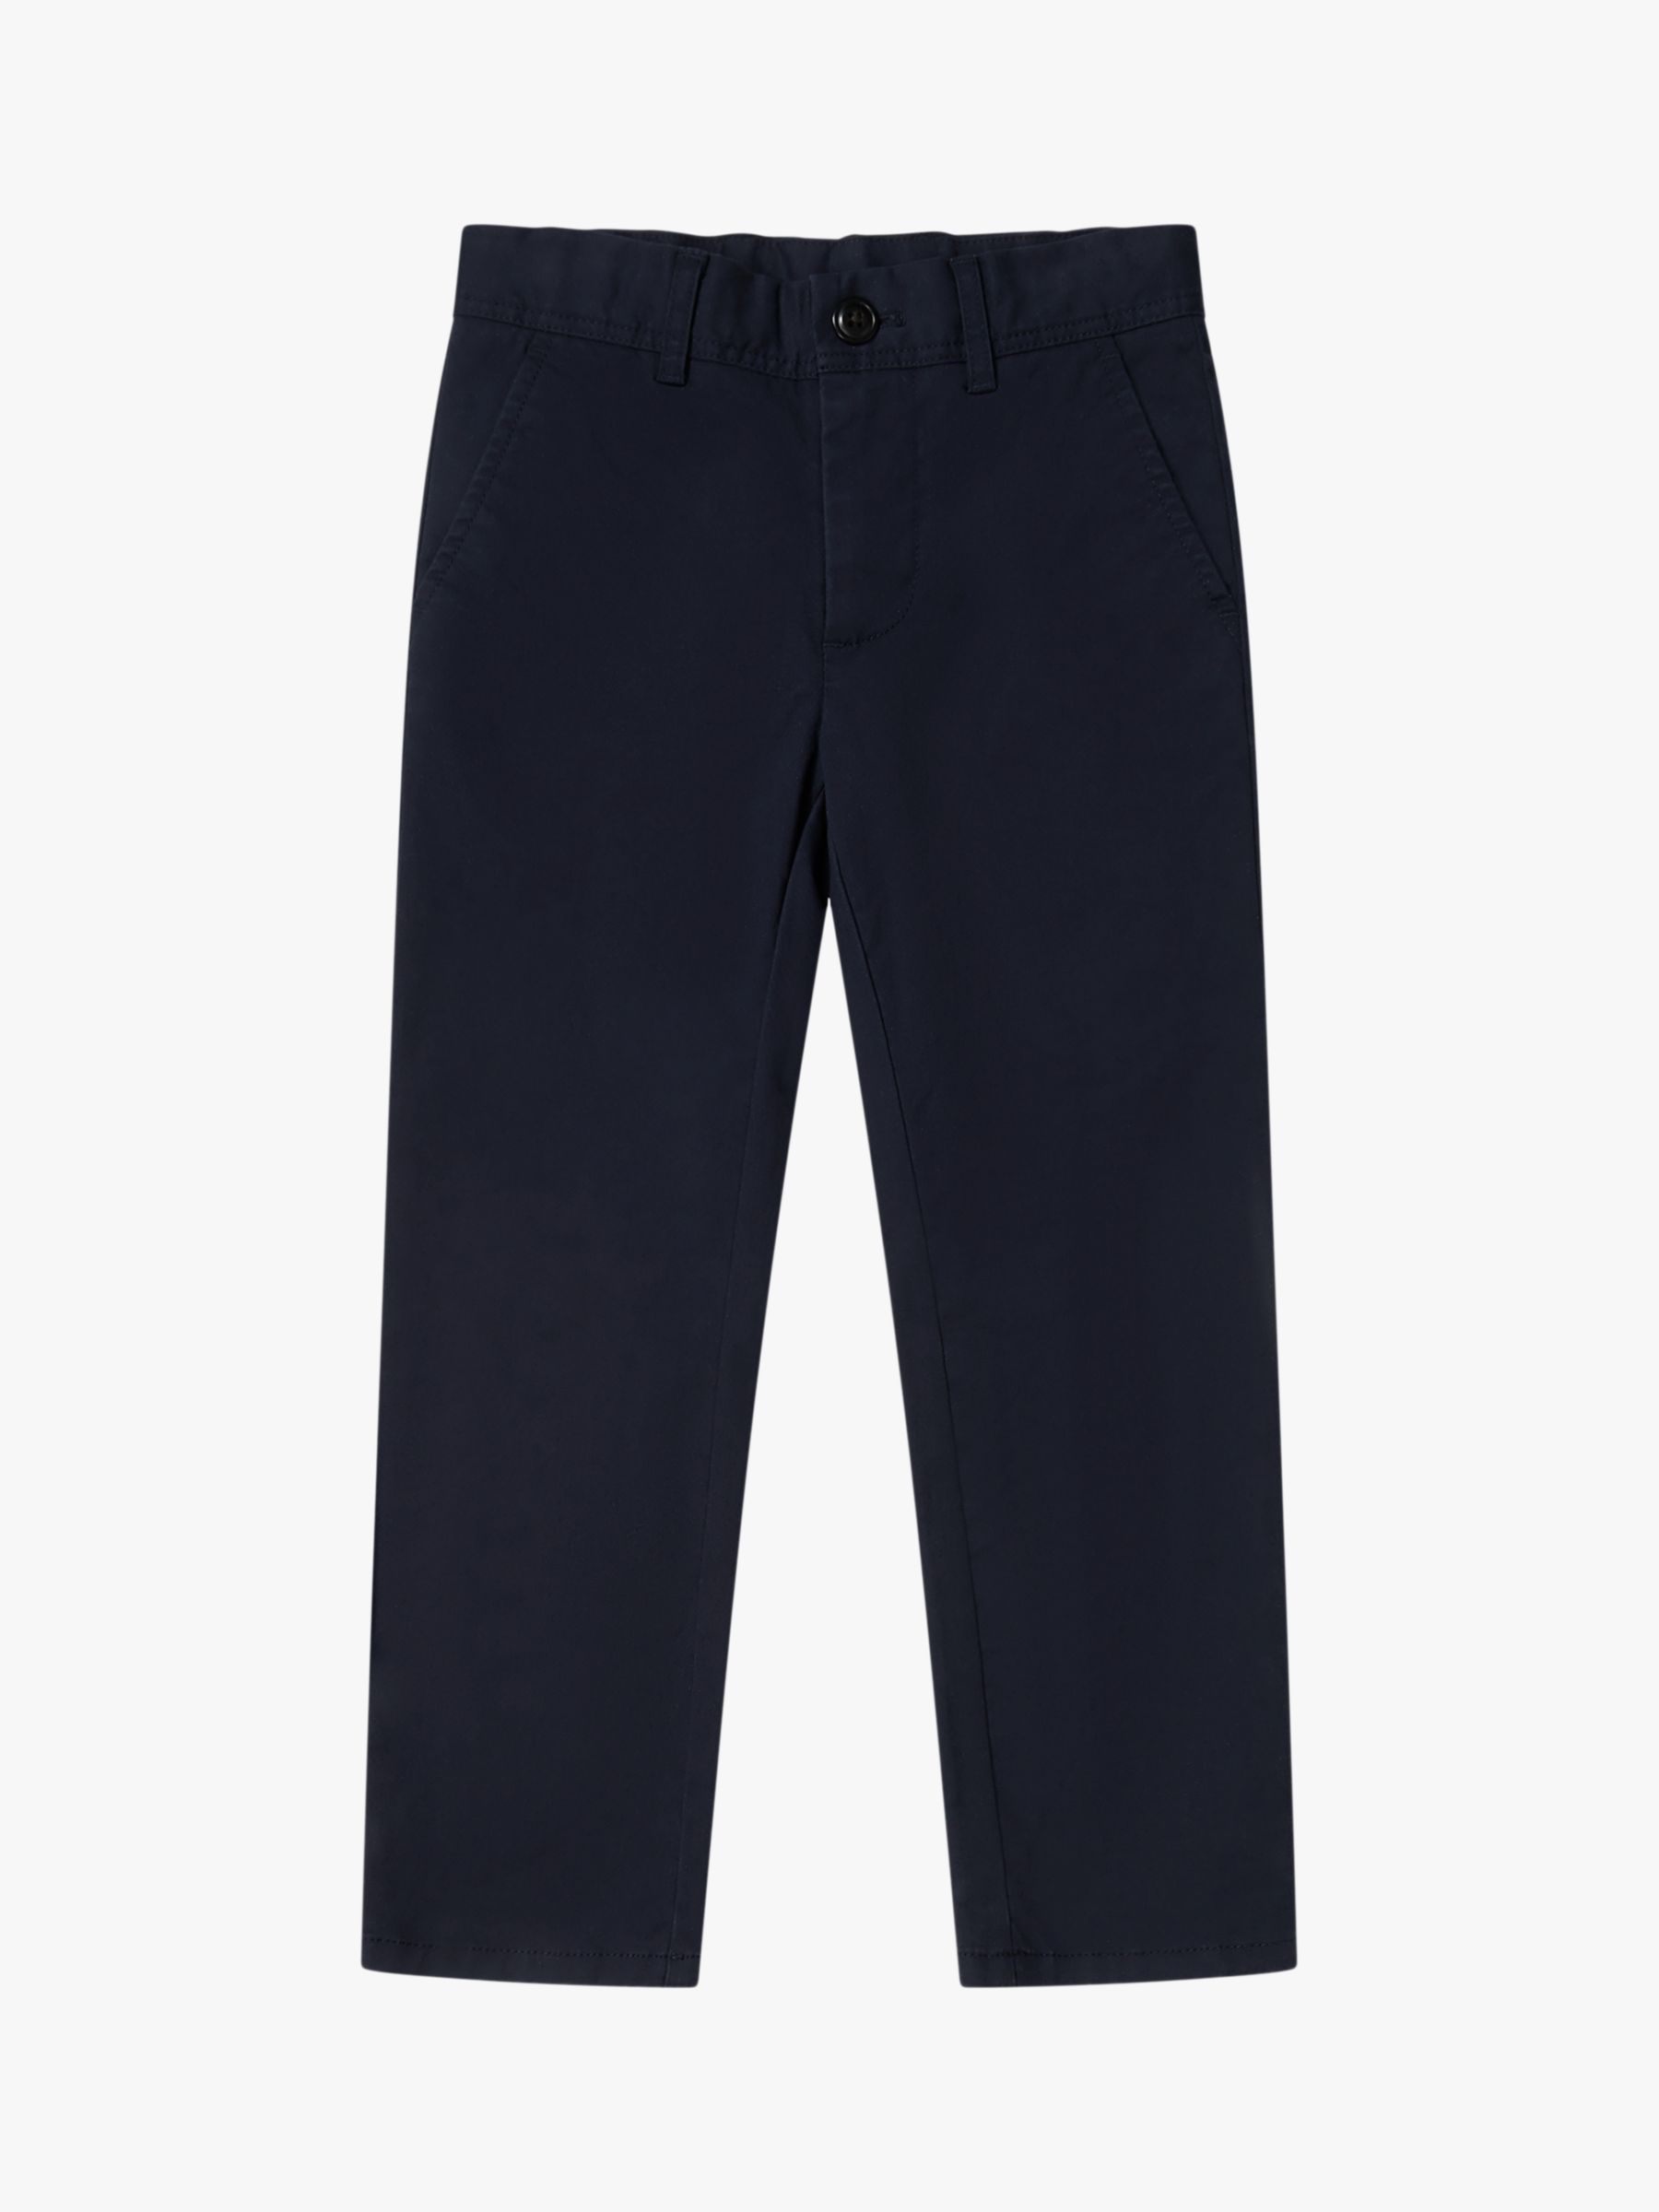 Reiss Kids' Pitch Slim Fit Chino Trousers, Navy at John Lewis & Partners